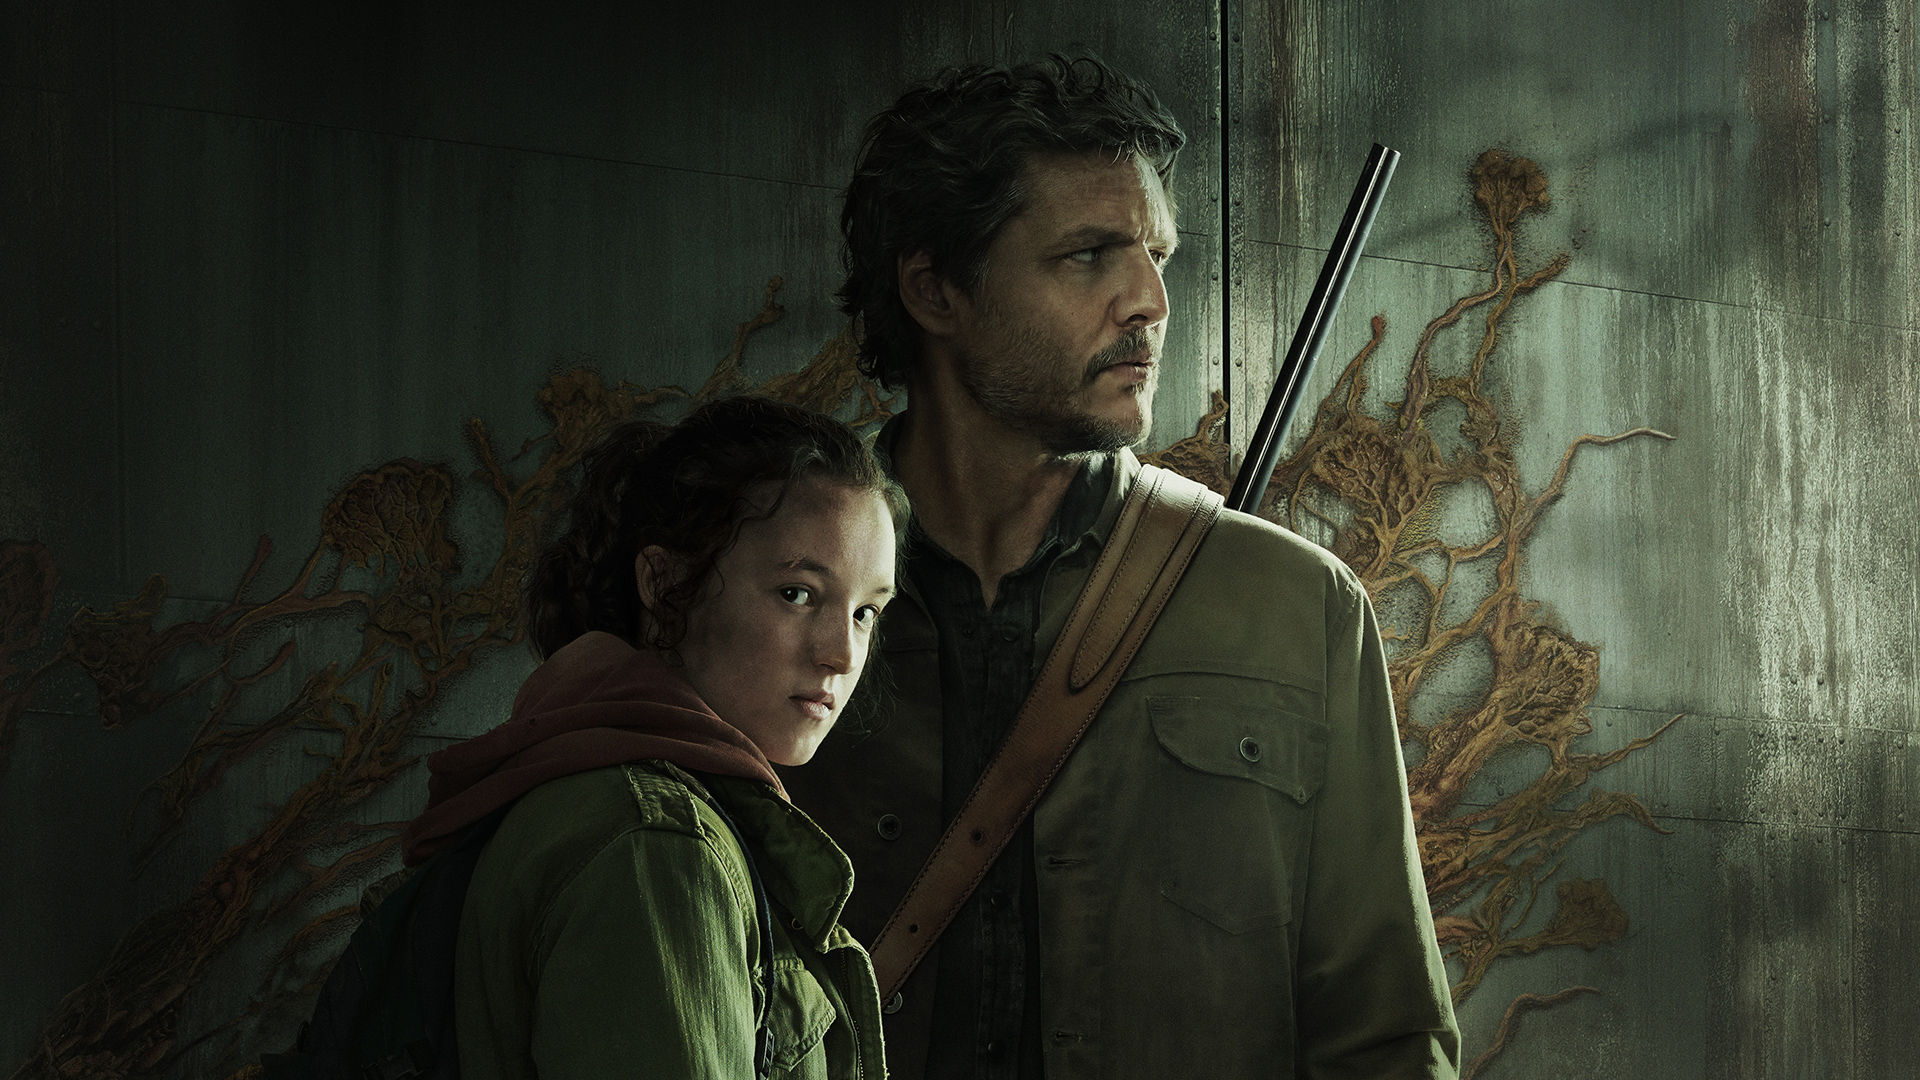 Bella Ramsey's Ellie and Pedro Pascal's Joel look in different directions in a promotional image for The Last of Us